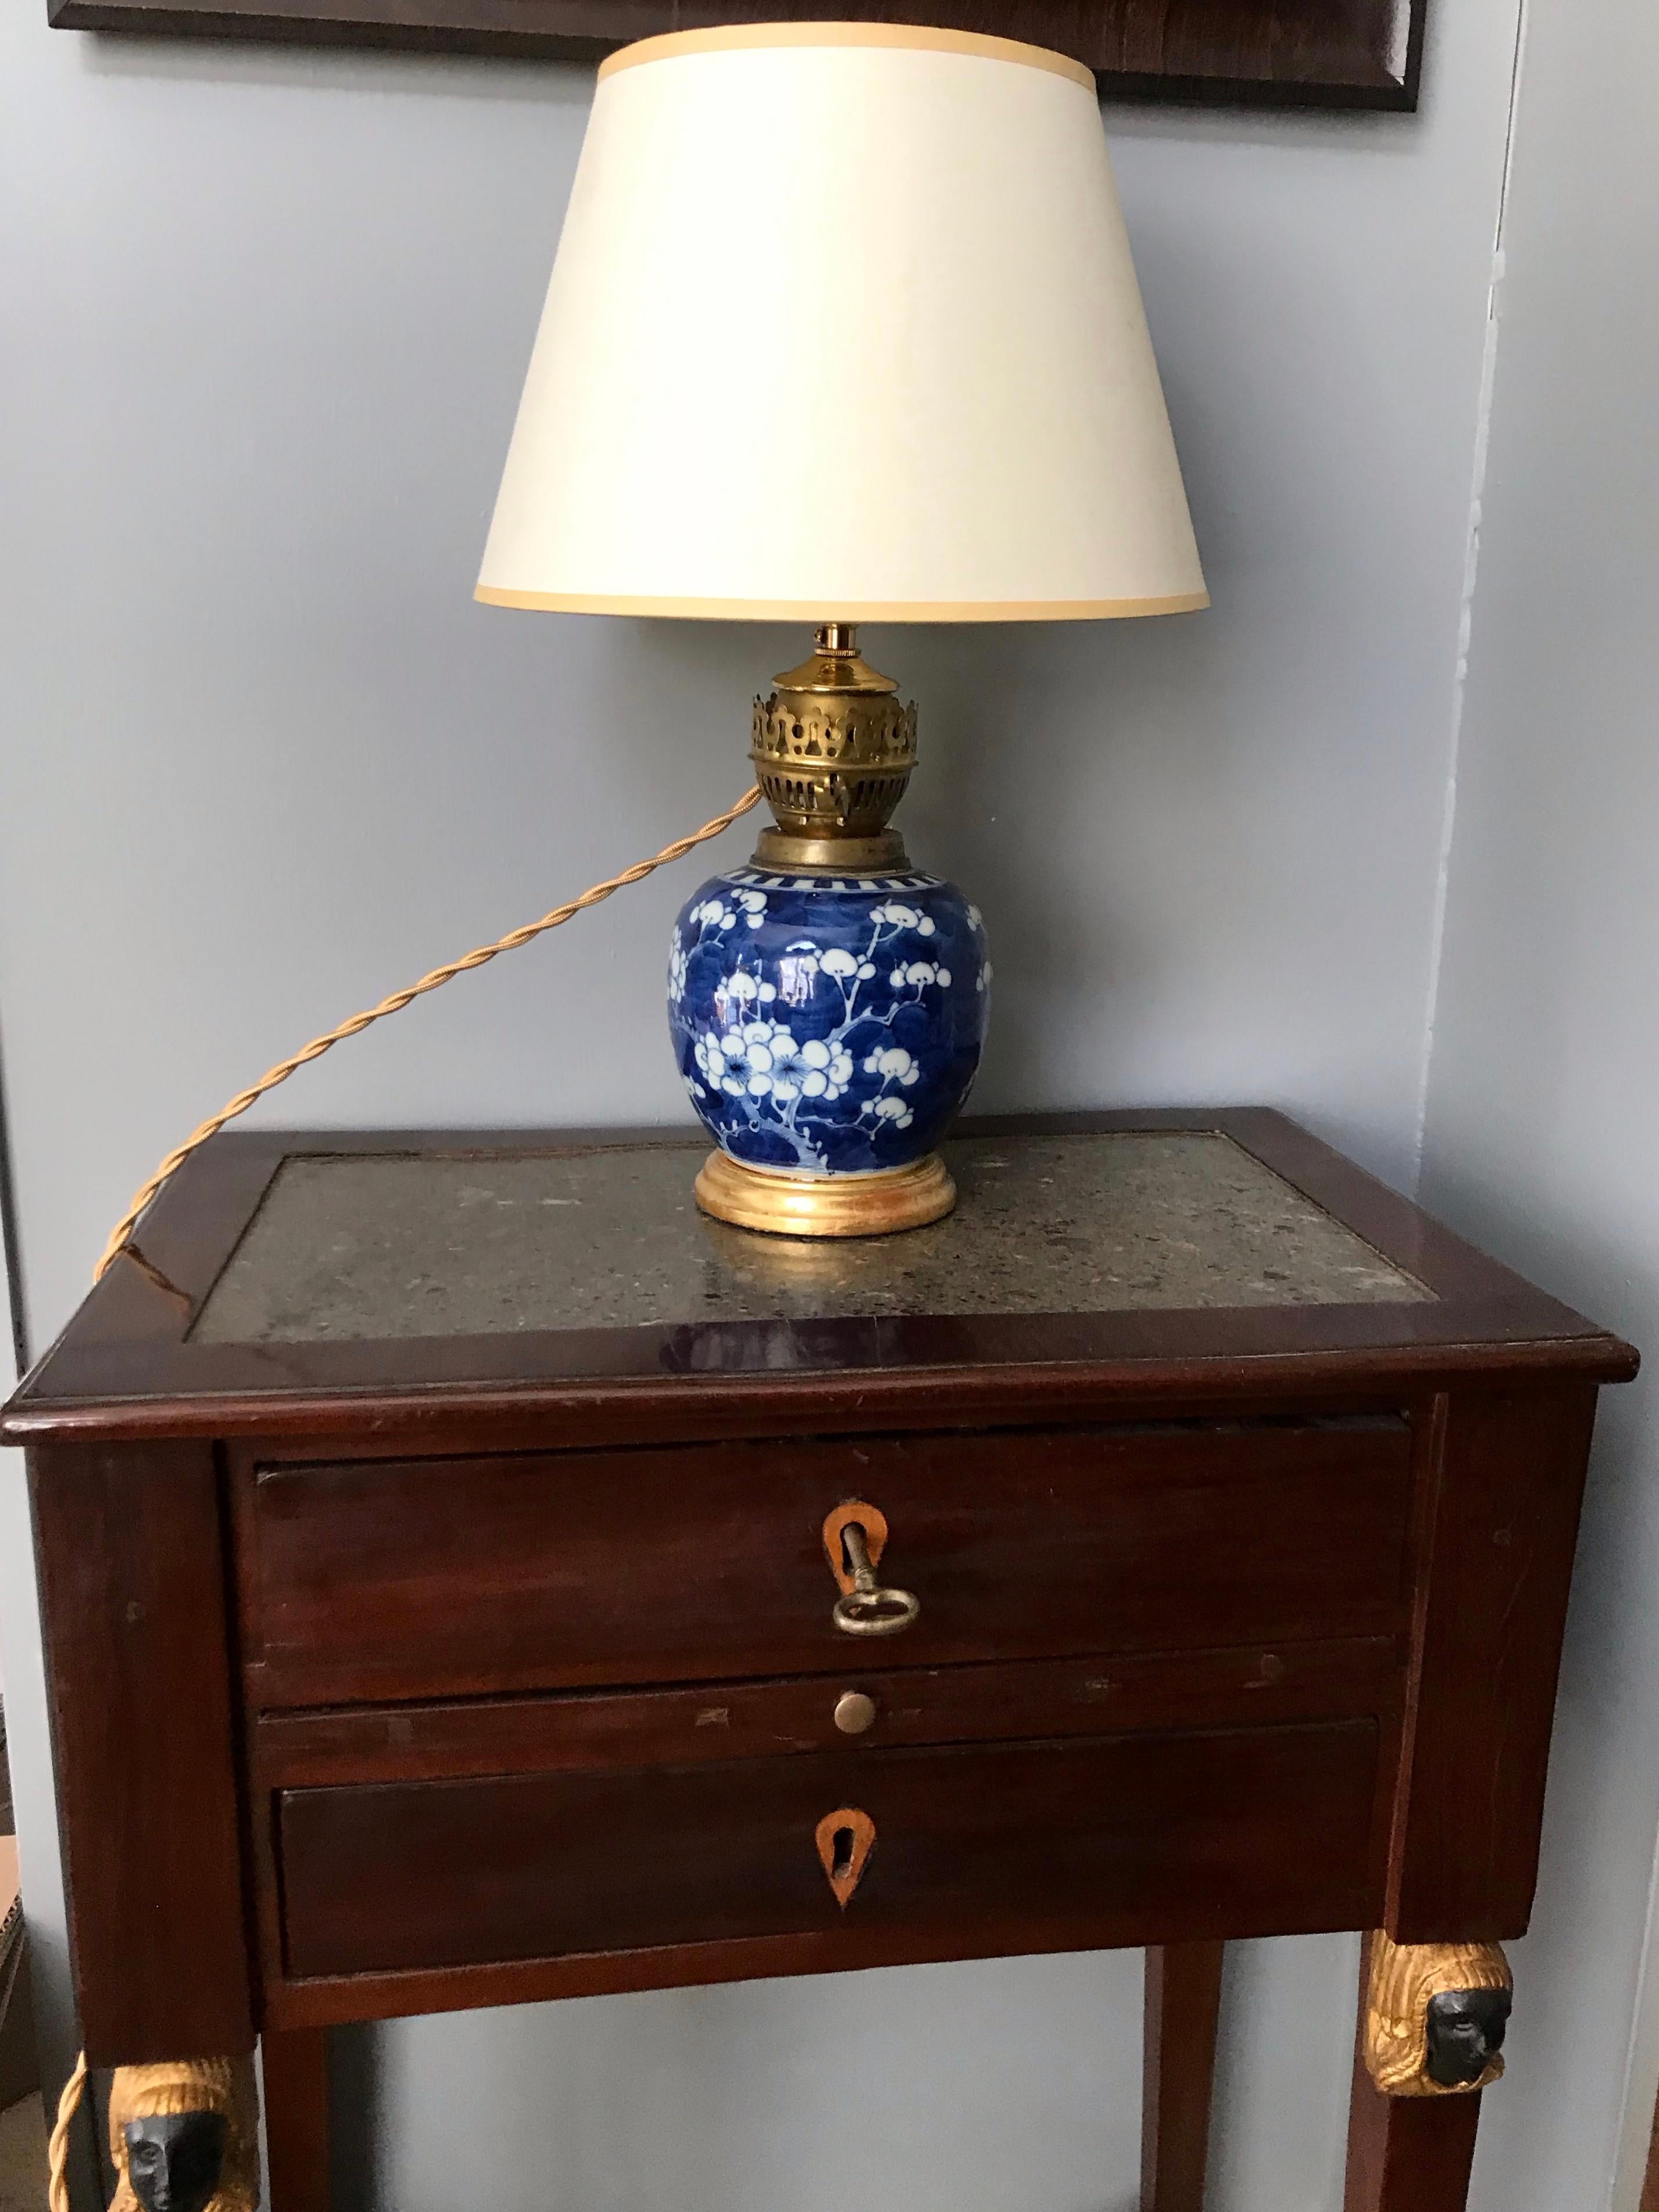 Blue and white cherry blossom vase lamp on gilt wood base. Late 19th Century hand-painted blue and white Chinese vase in the cherry blossom pattern mounted as a gas lamp in the late 1800's now converted to electric, fitted for a clip-on shade